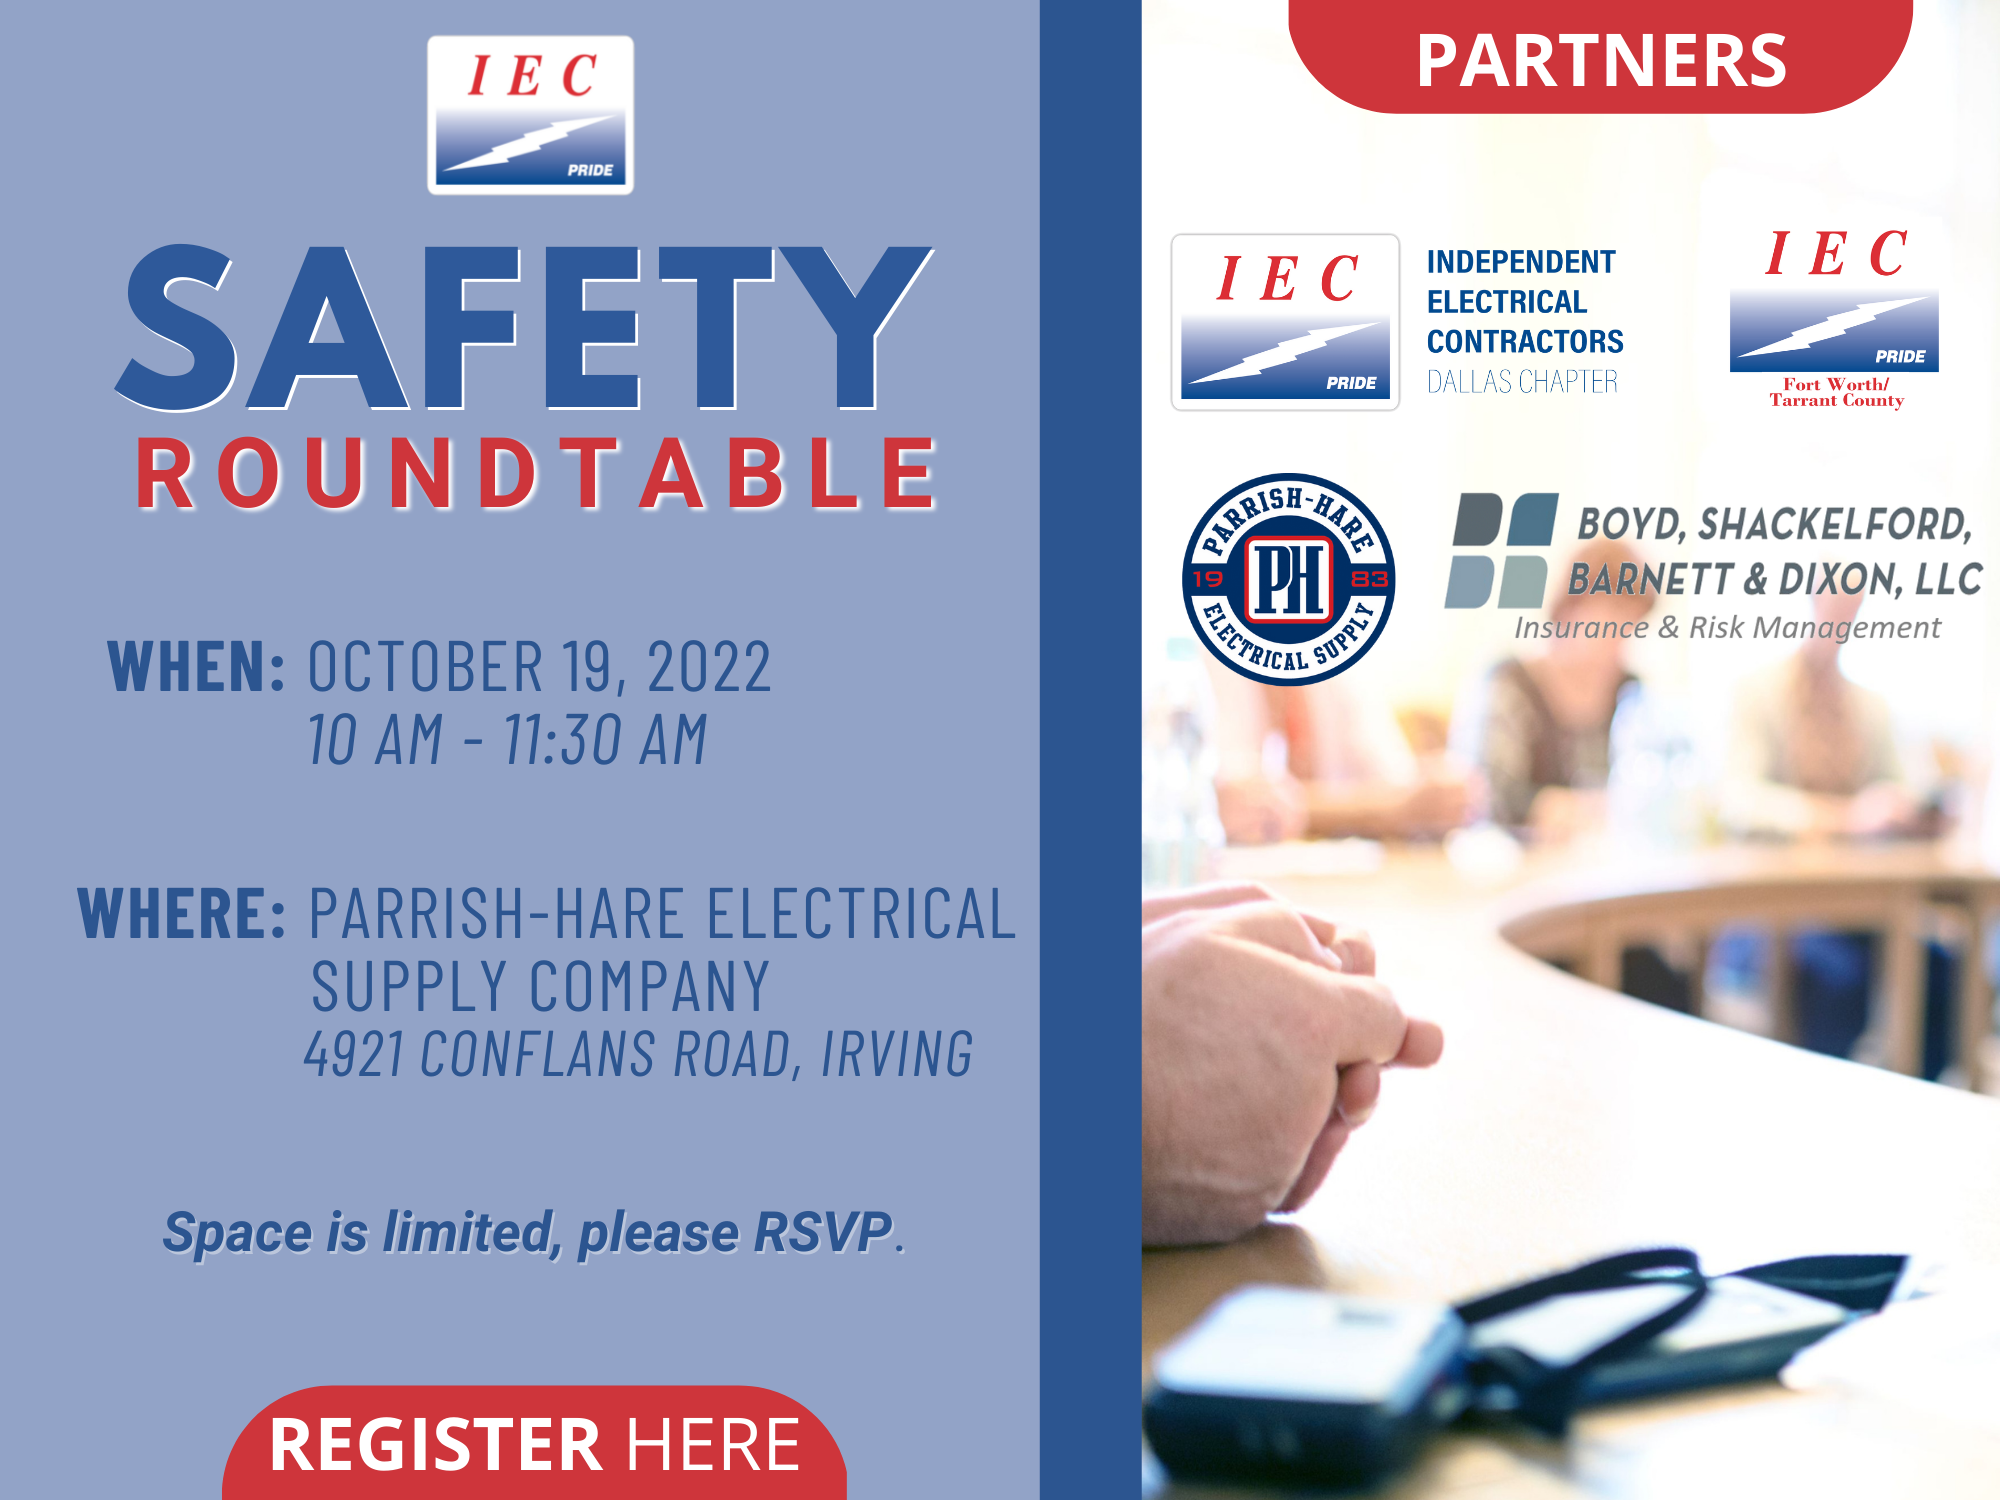 IEC Safety Roundtable 10/19/22